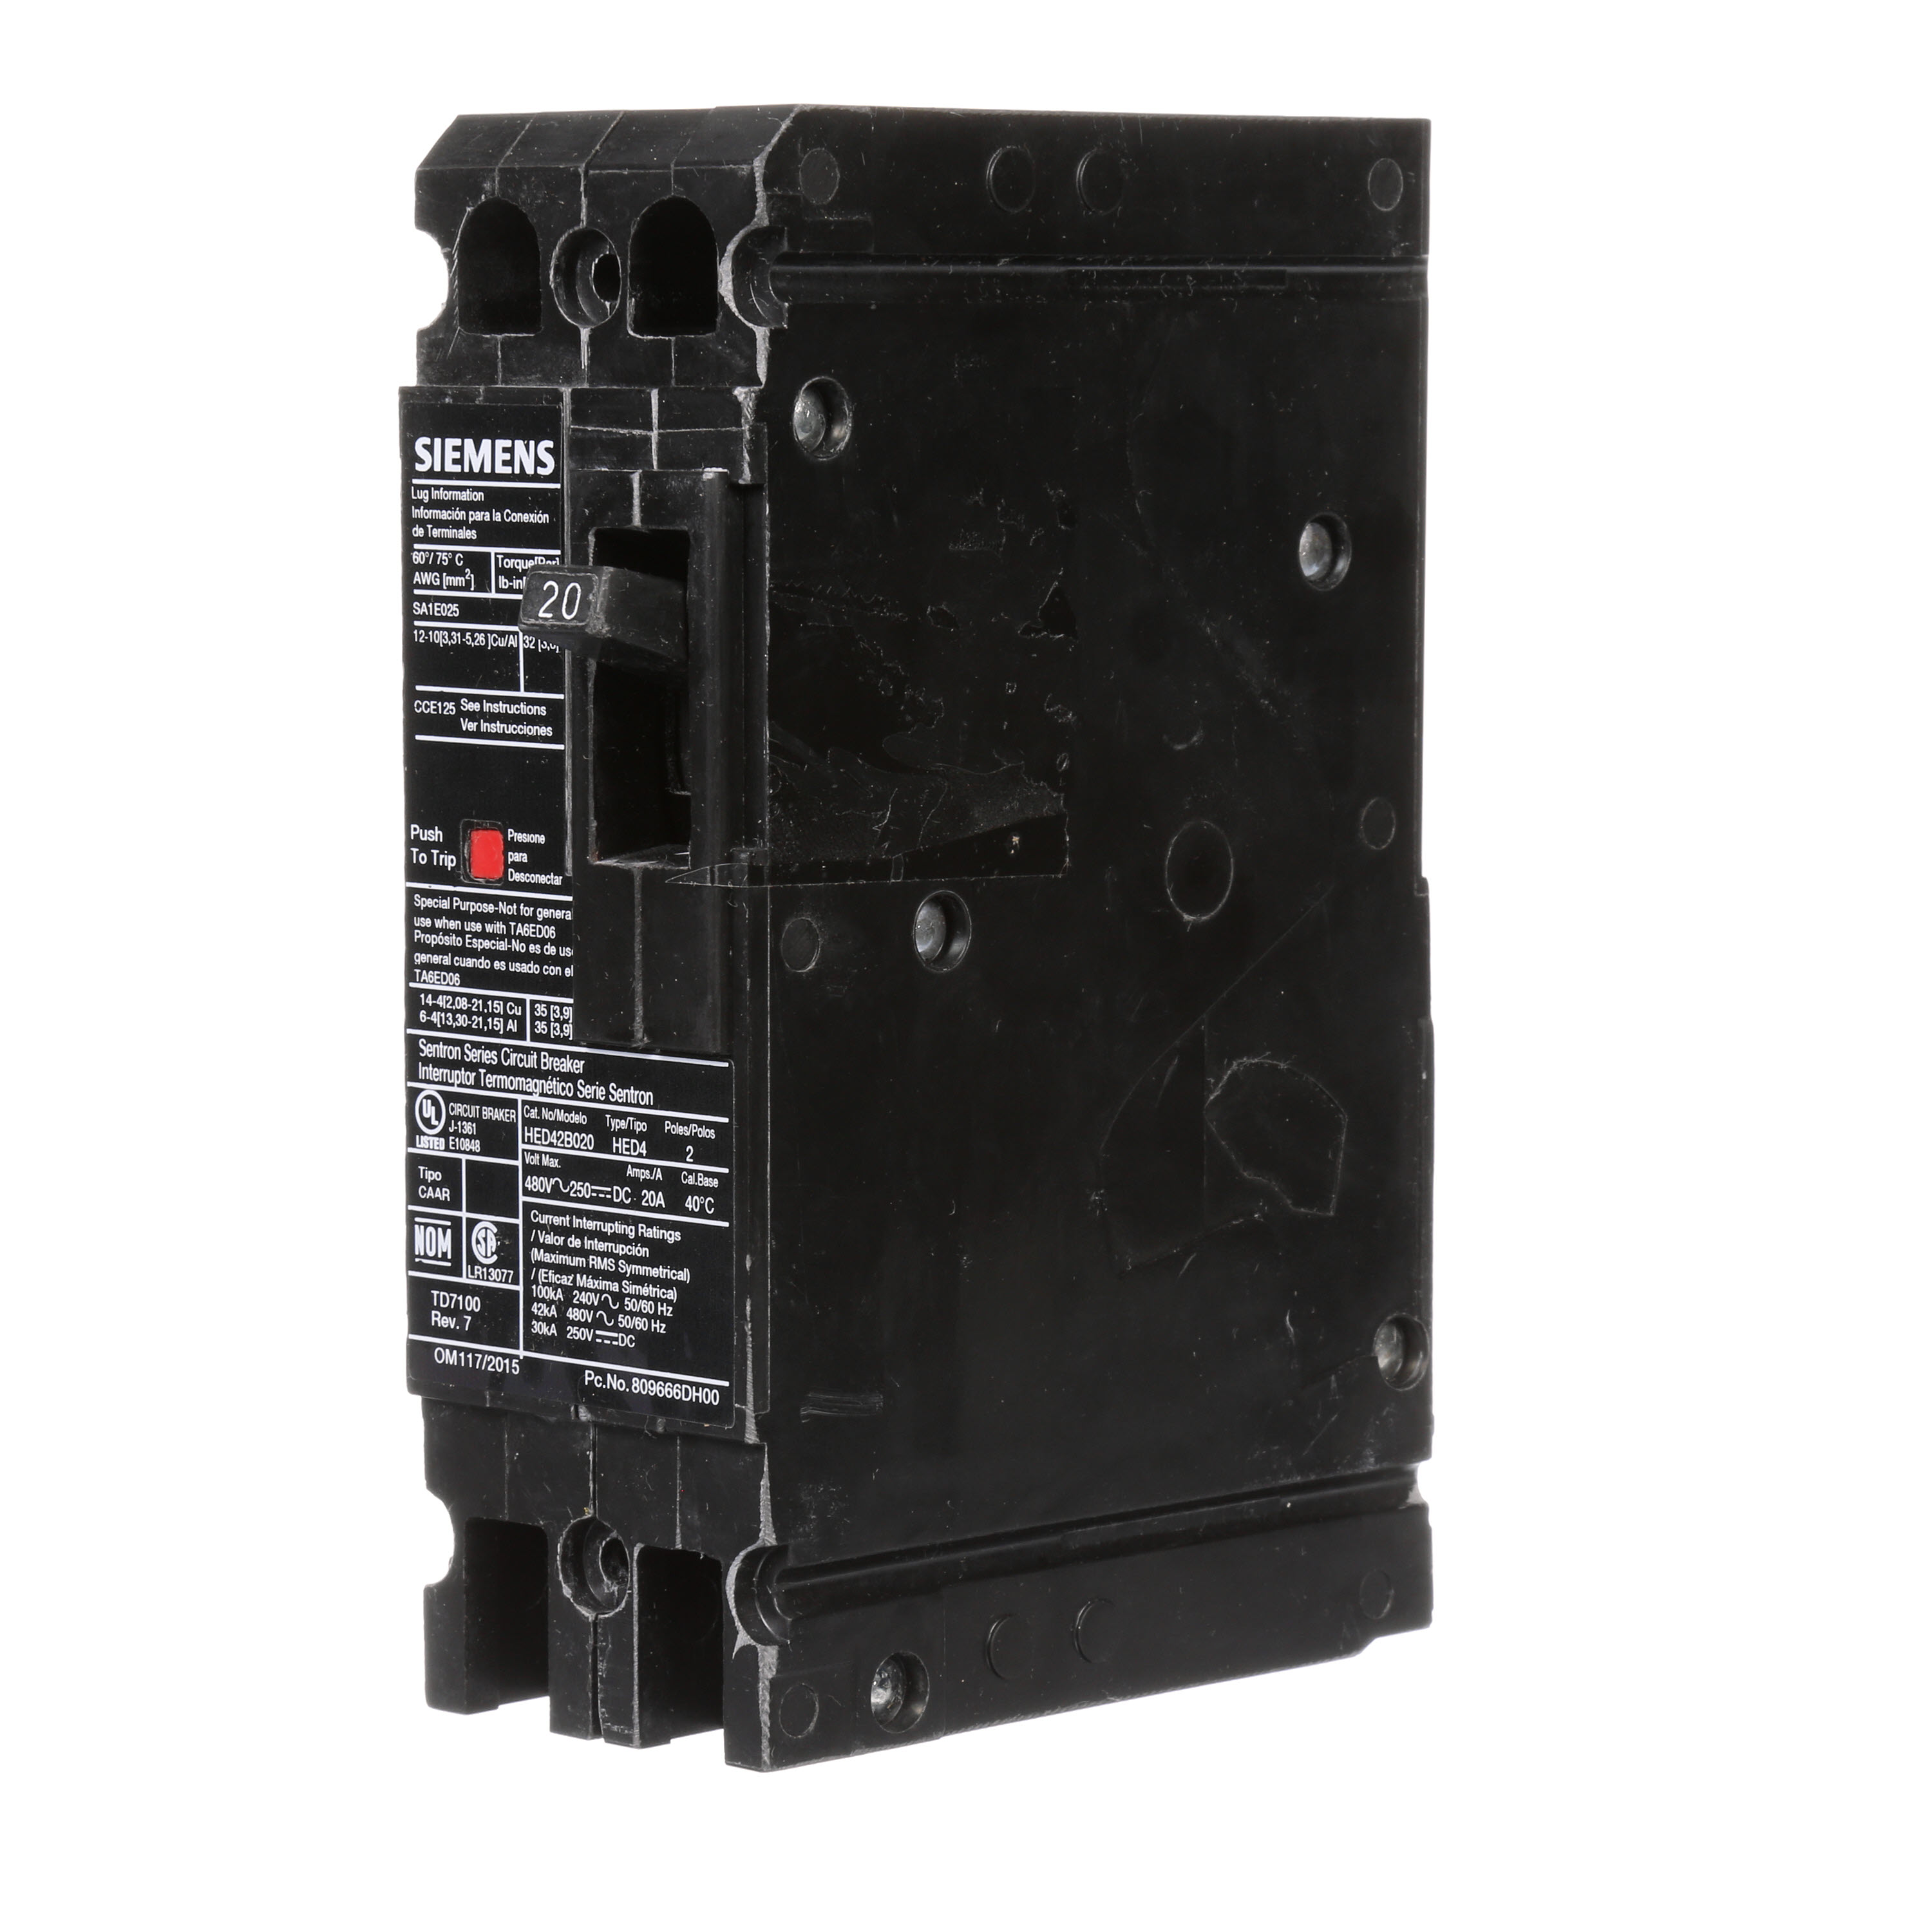 SIEMENS LOW VOLTAGE SENTRON MOLDED CASE CIRCUIT BREAKER WITH THERMAL - MAGNETICTRIP UNIT. STANDARD 40 DEG C BREAKER ED FRAME WITH HIGH BREAKING CAPACITY. 20A 2-POLE (42KAIC AT 480V). NON-INTERCHANGEABLE TRIP UNIT. SPECIAL FEATURES LOAD LUGS ONLY (SA1E025) WIRE RANGE 14 - 10AWG (CU) / 12 - 10AWG (AL). DIMENSIONS (W x H x D) IN 2.00 x 6.4 x 3.92.